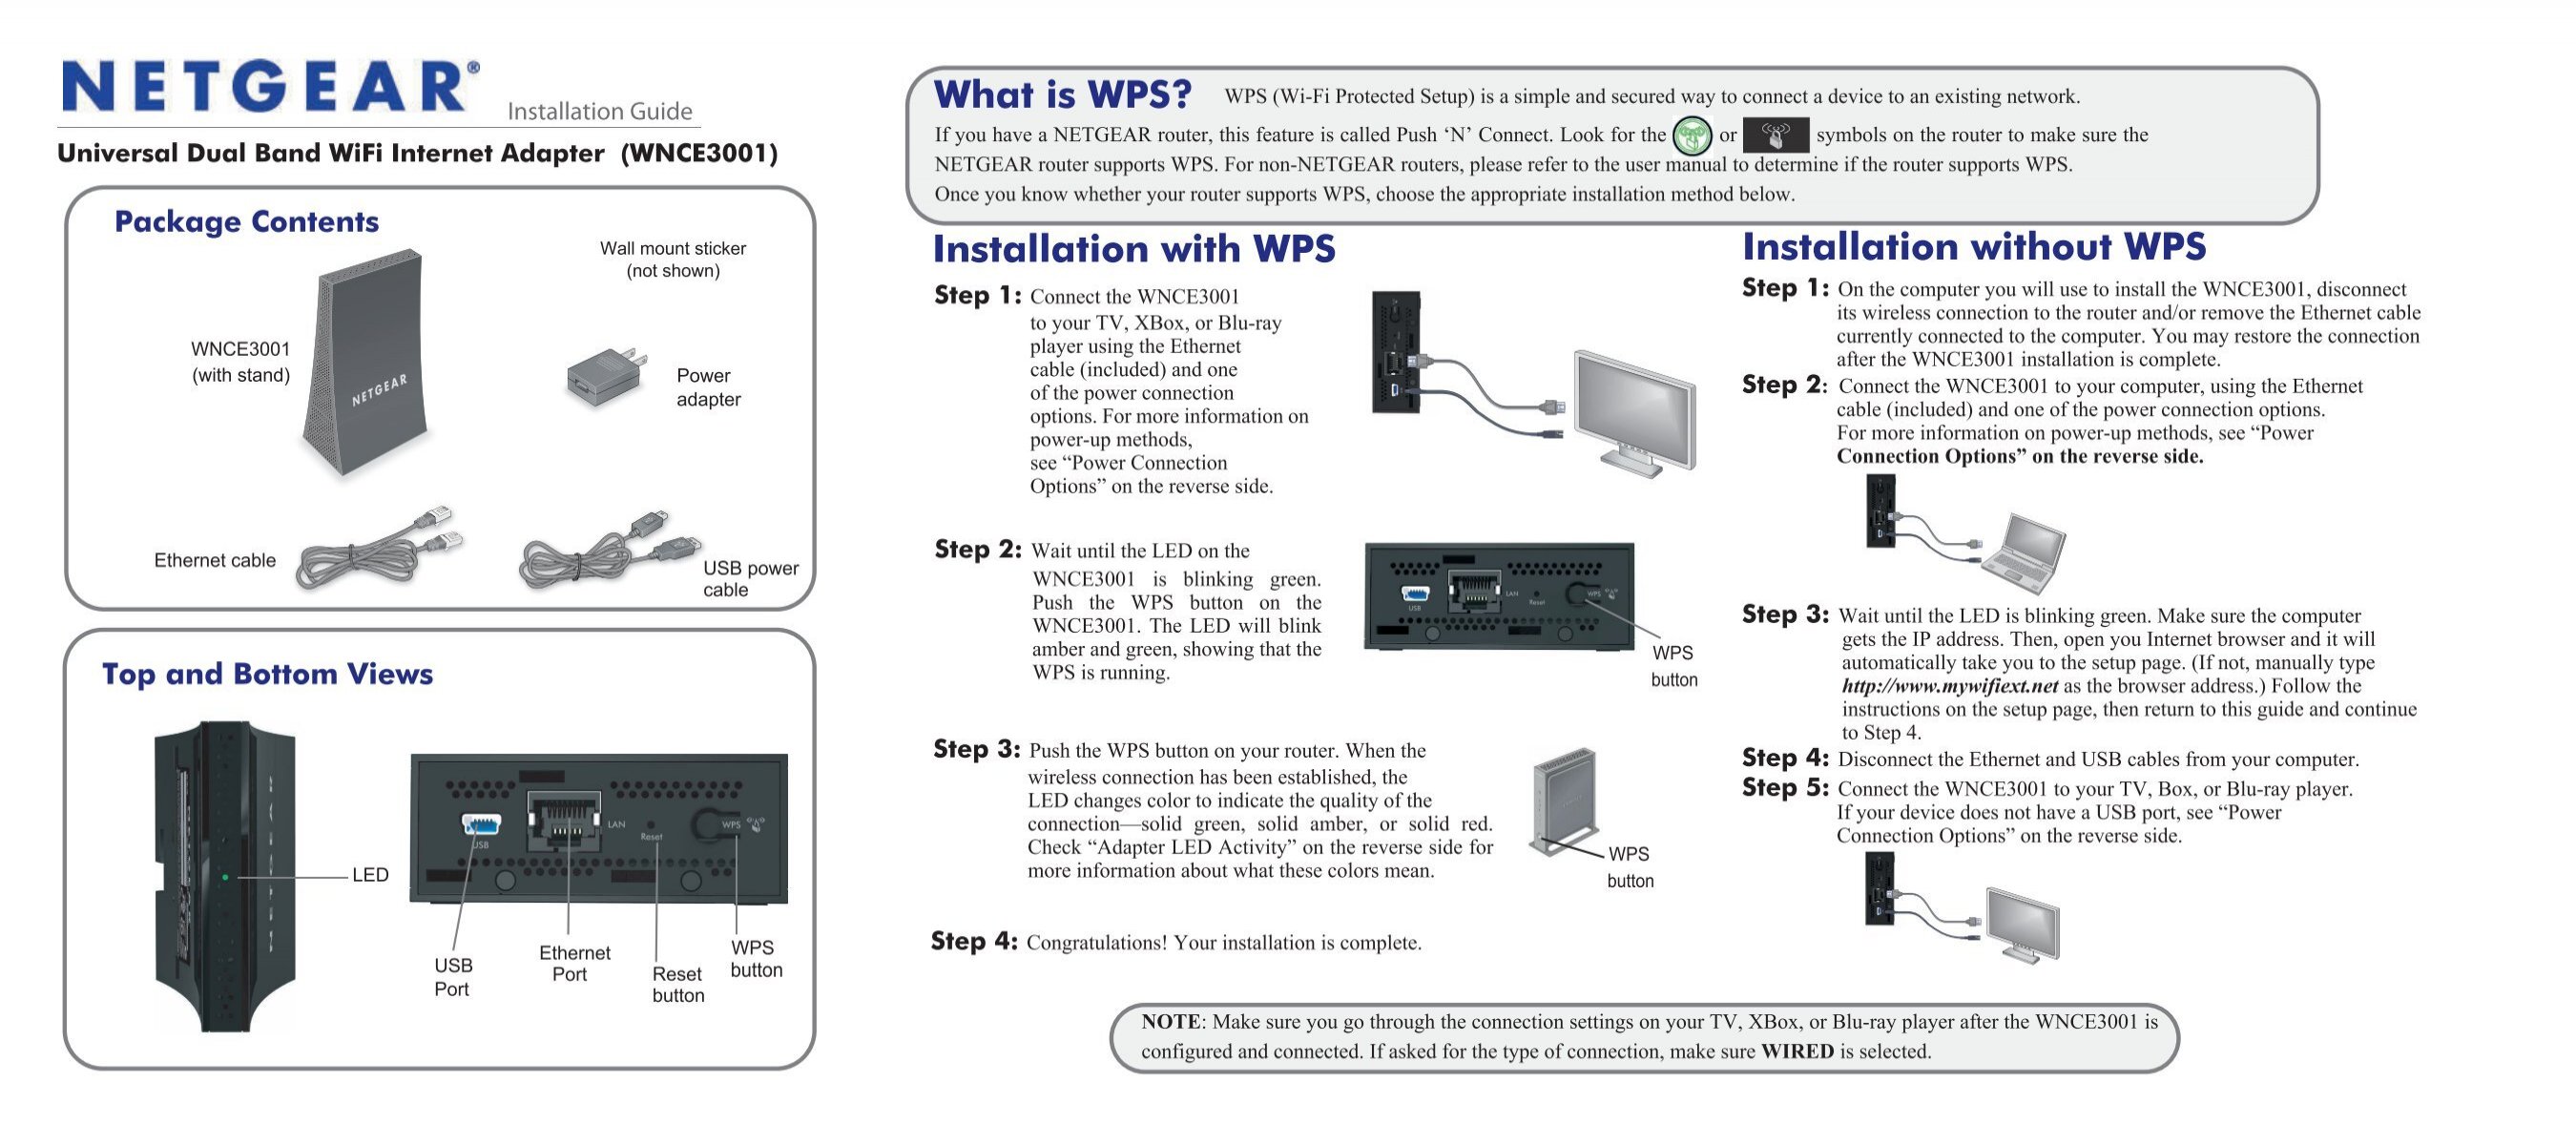 What is WPS (Push Button) and how to use it to connect a TV, Blu